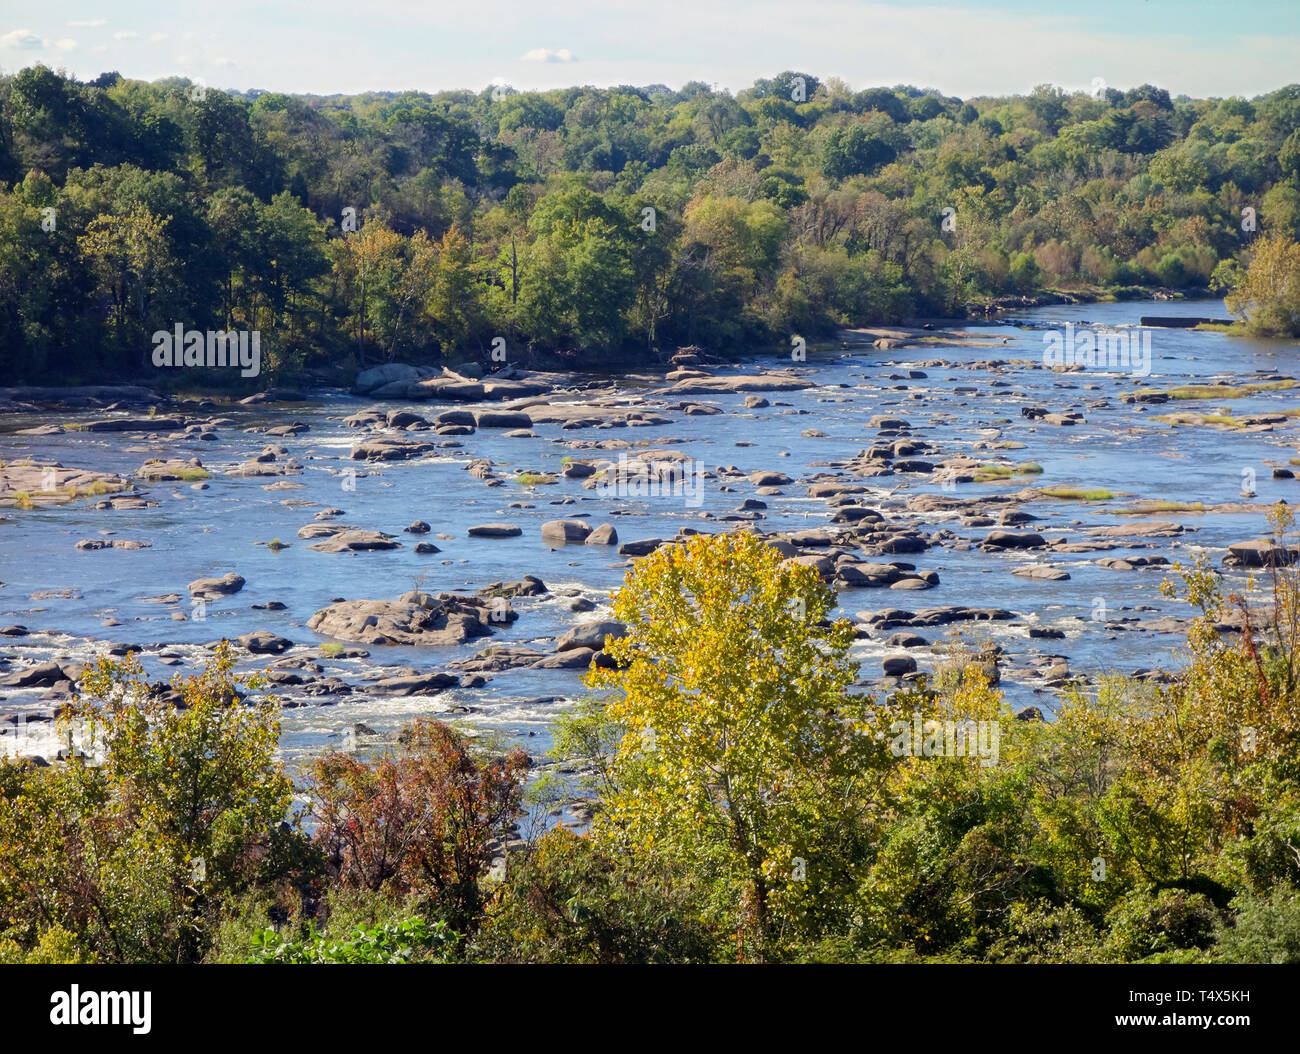 View of James River from Hollywood cemetery, Richmond, Virginia, US, 2017. Stock Photo